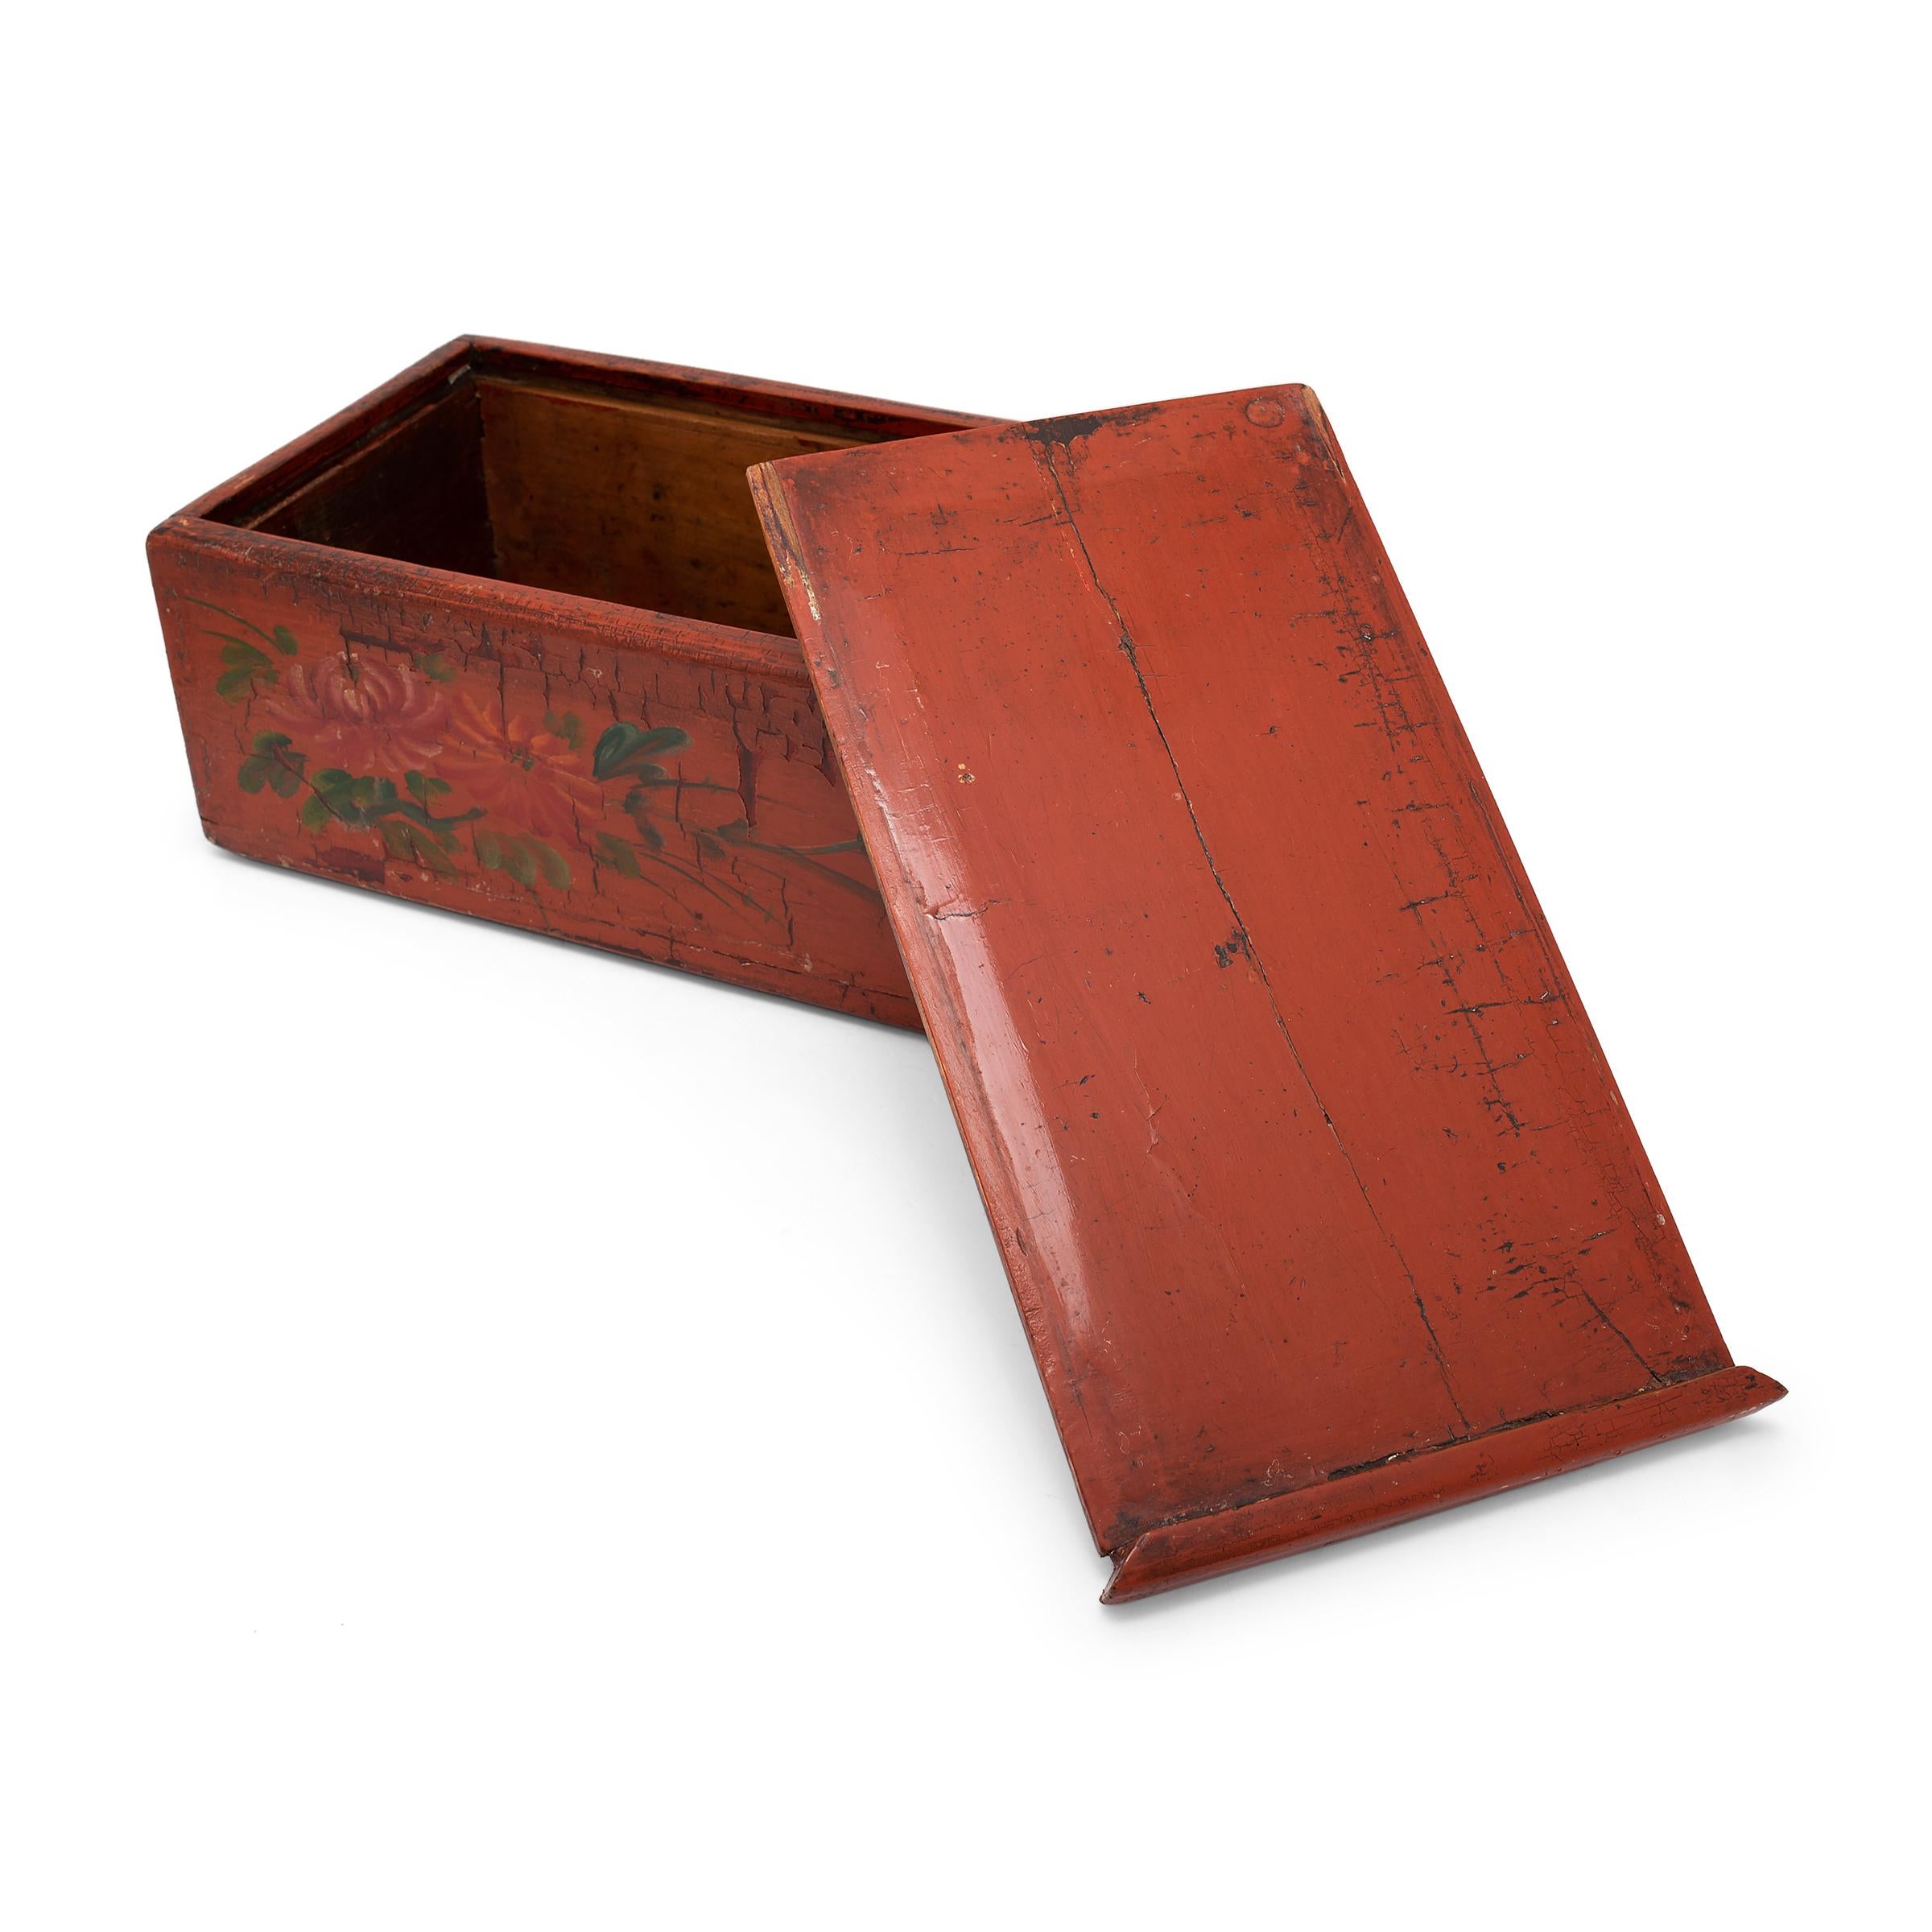 Lacquered Chinese Painted Orange Lacquer Box, c. 1850